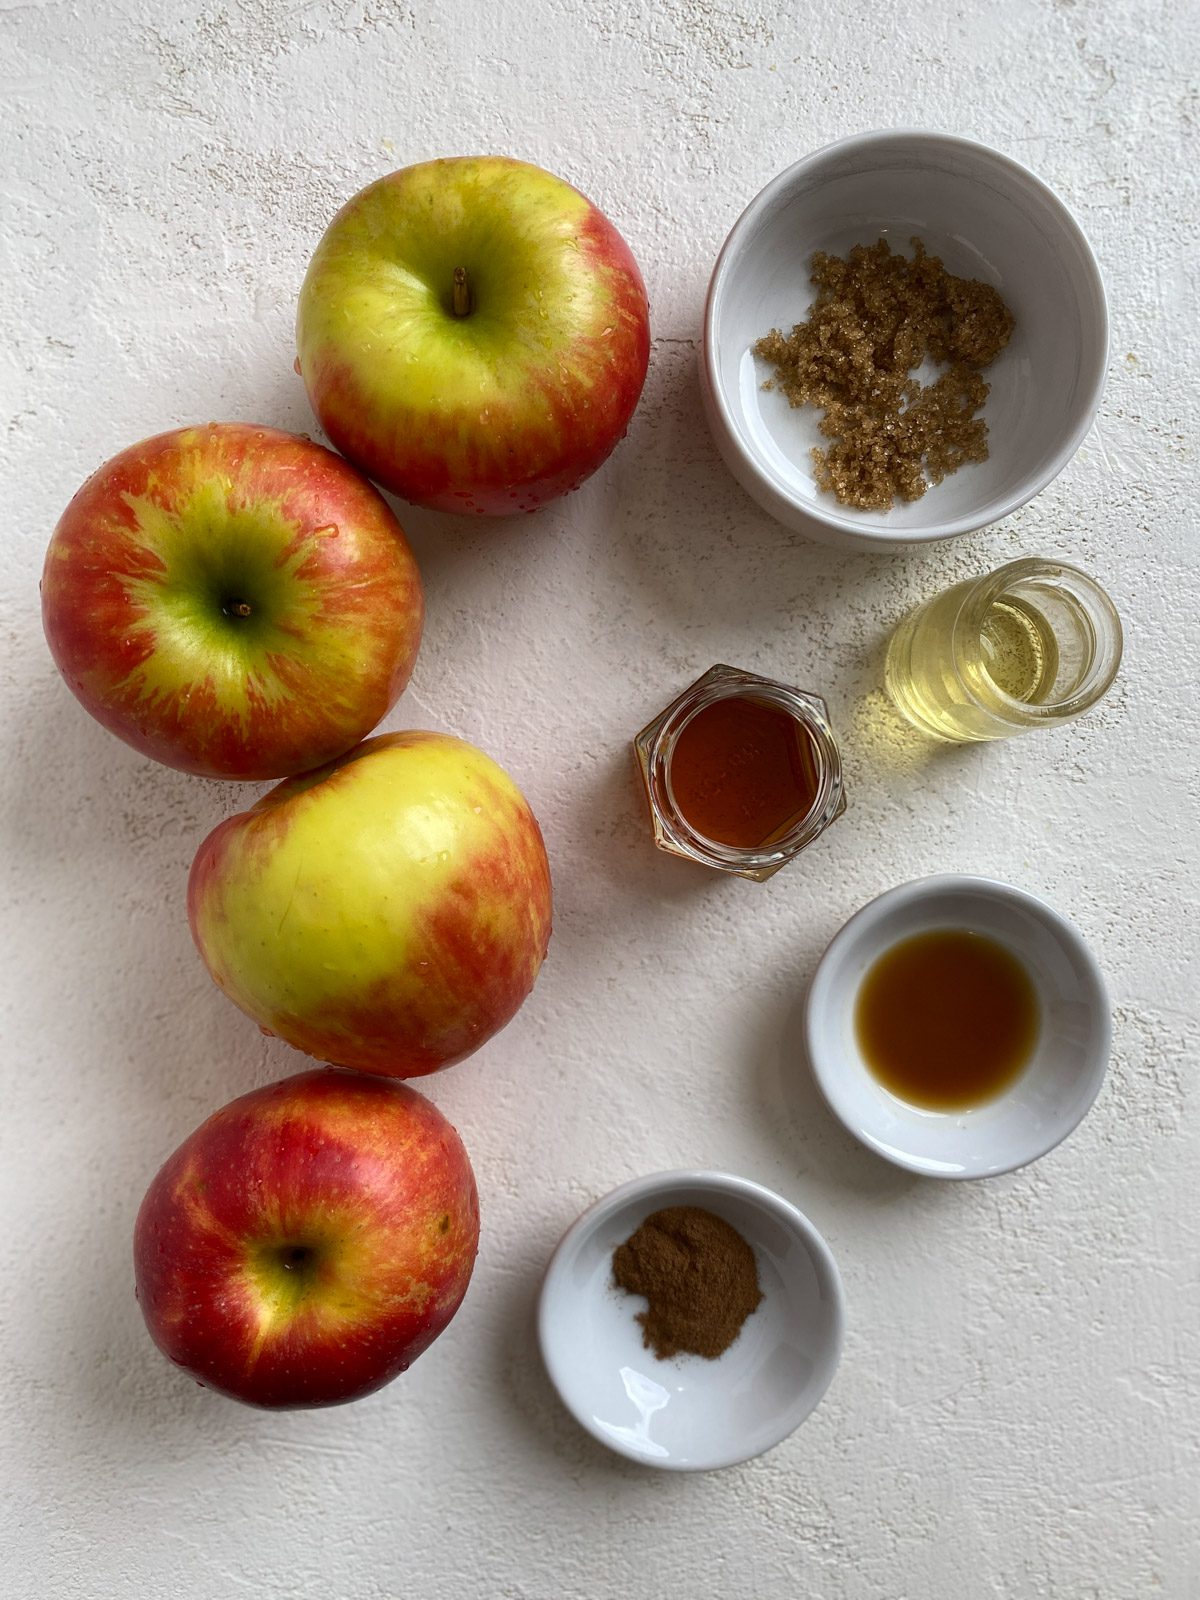 ingredients for Air Fryer Apples measured out against a white surface